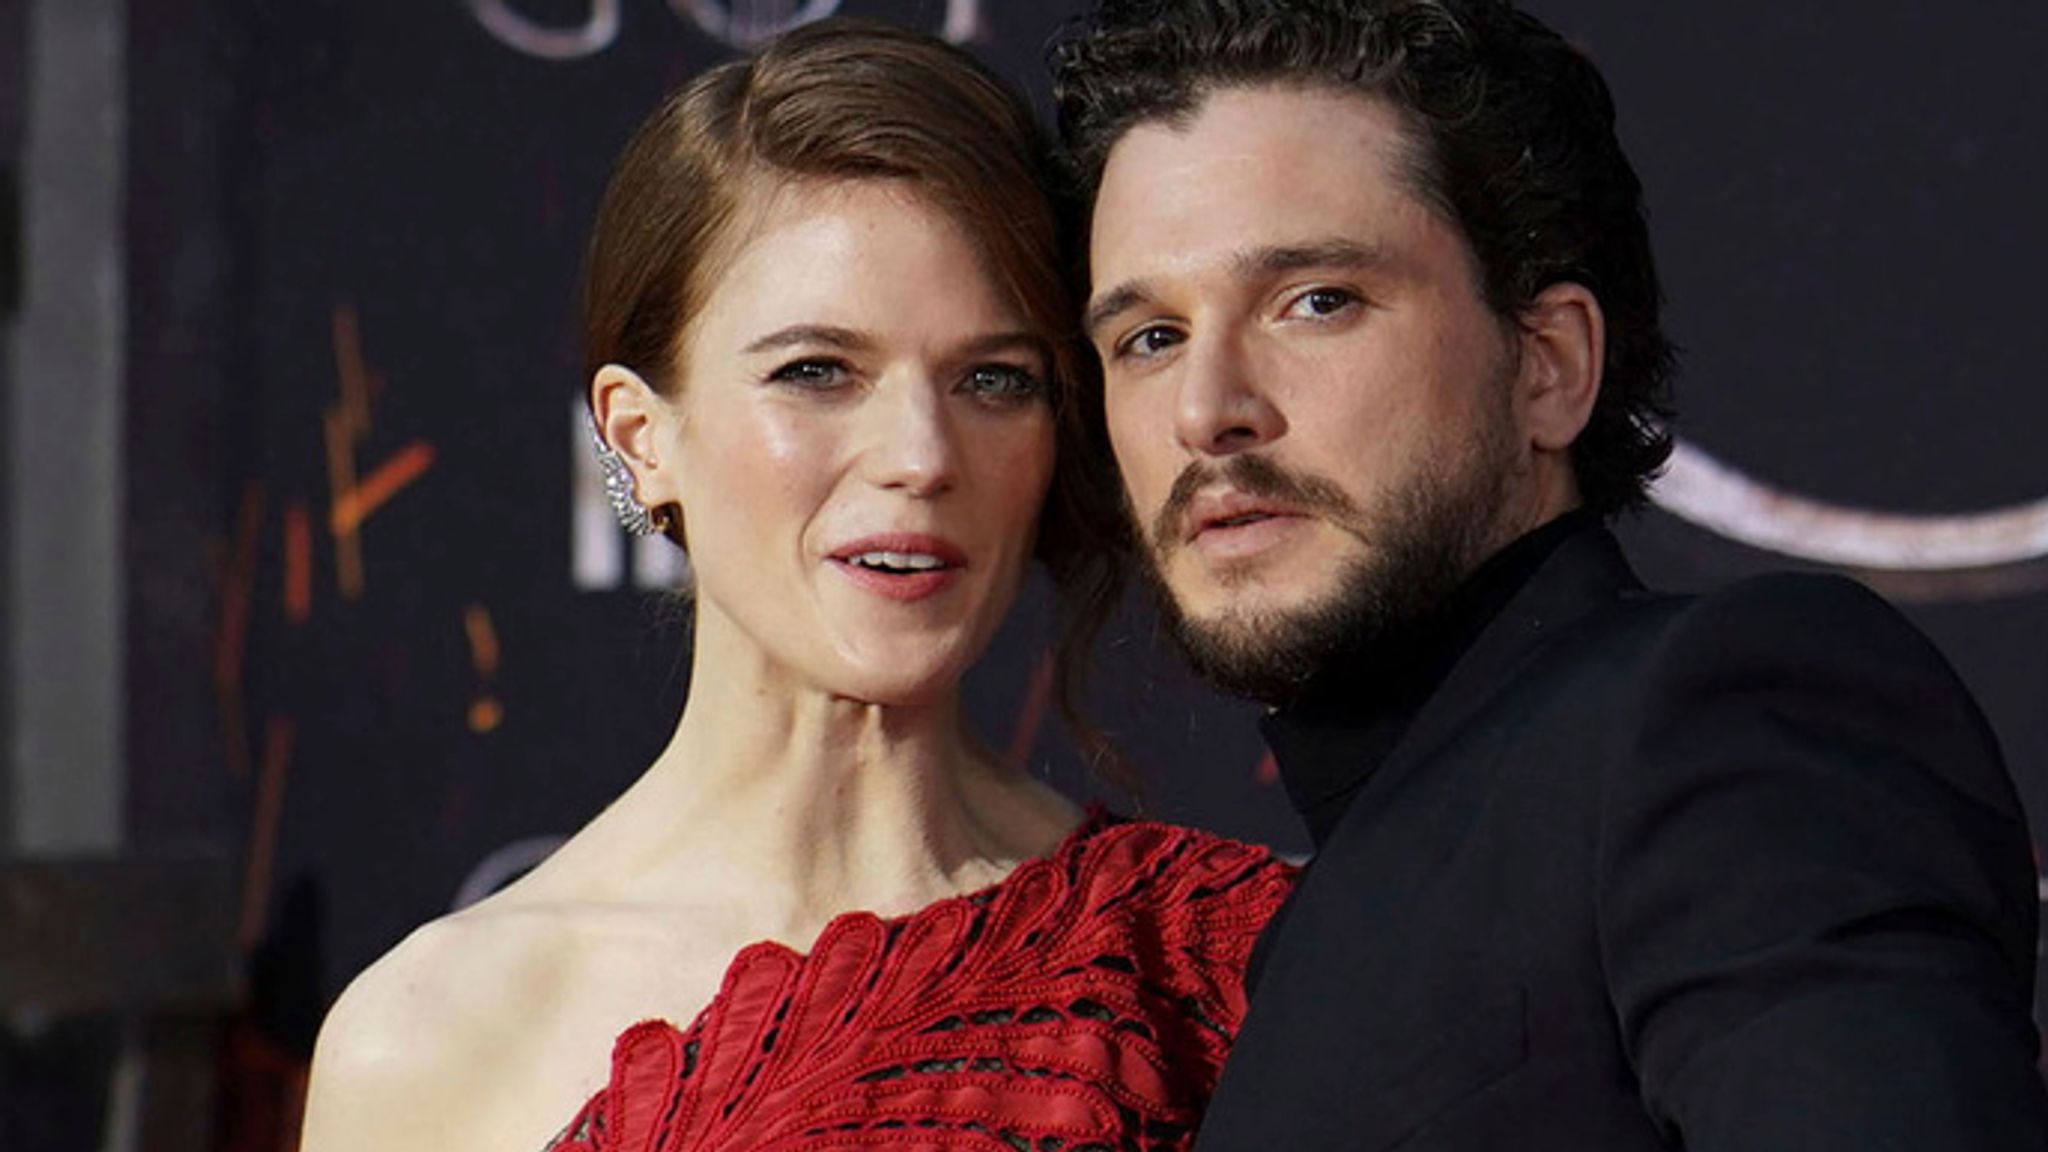 Game Of Thrones stars Kit Harington and Rose Leslie have second child ...